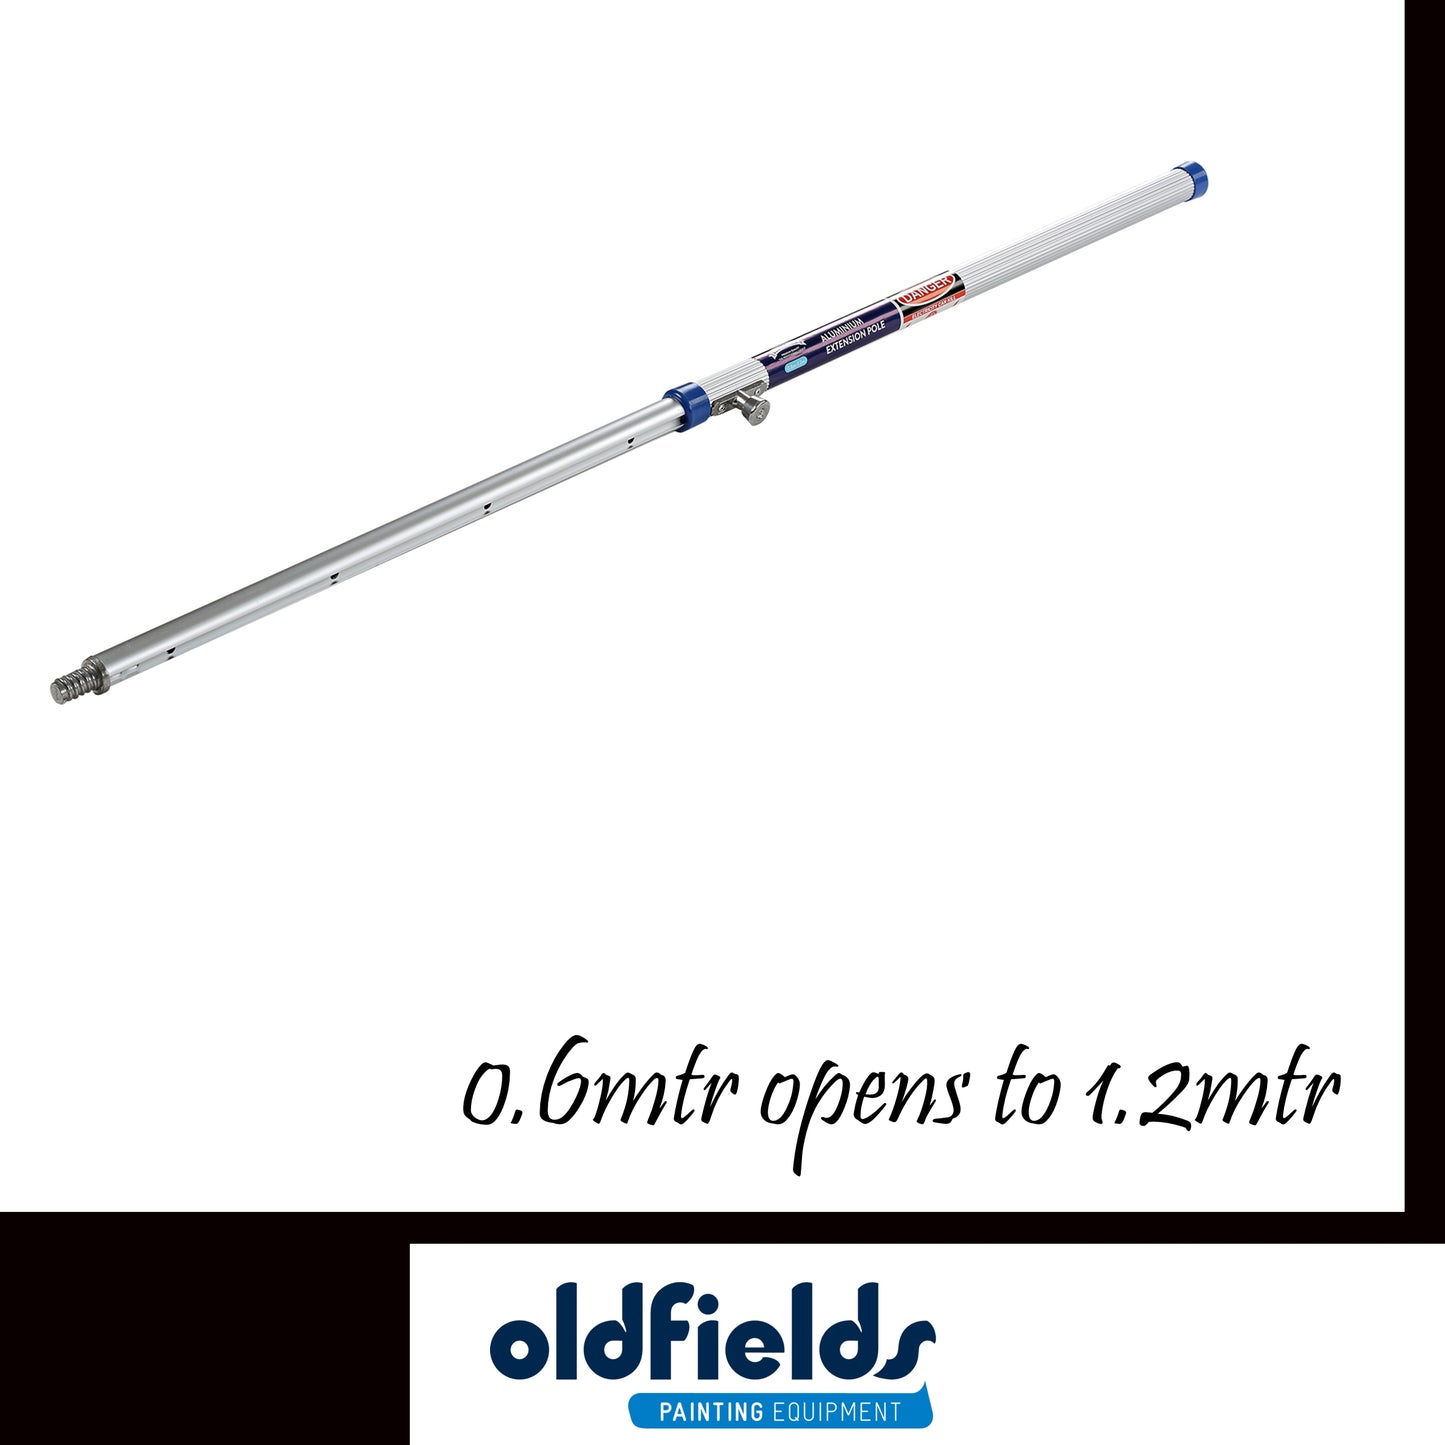 Pro series Aluminium Extension Poles 0.6mtr - 1.2mtr from Oldfields